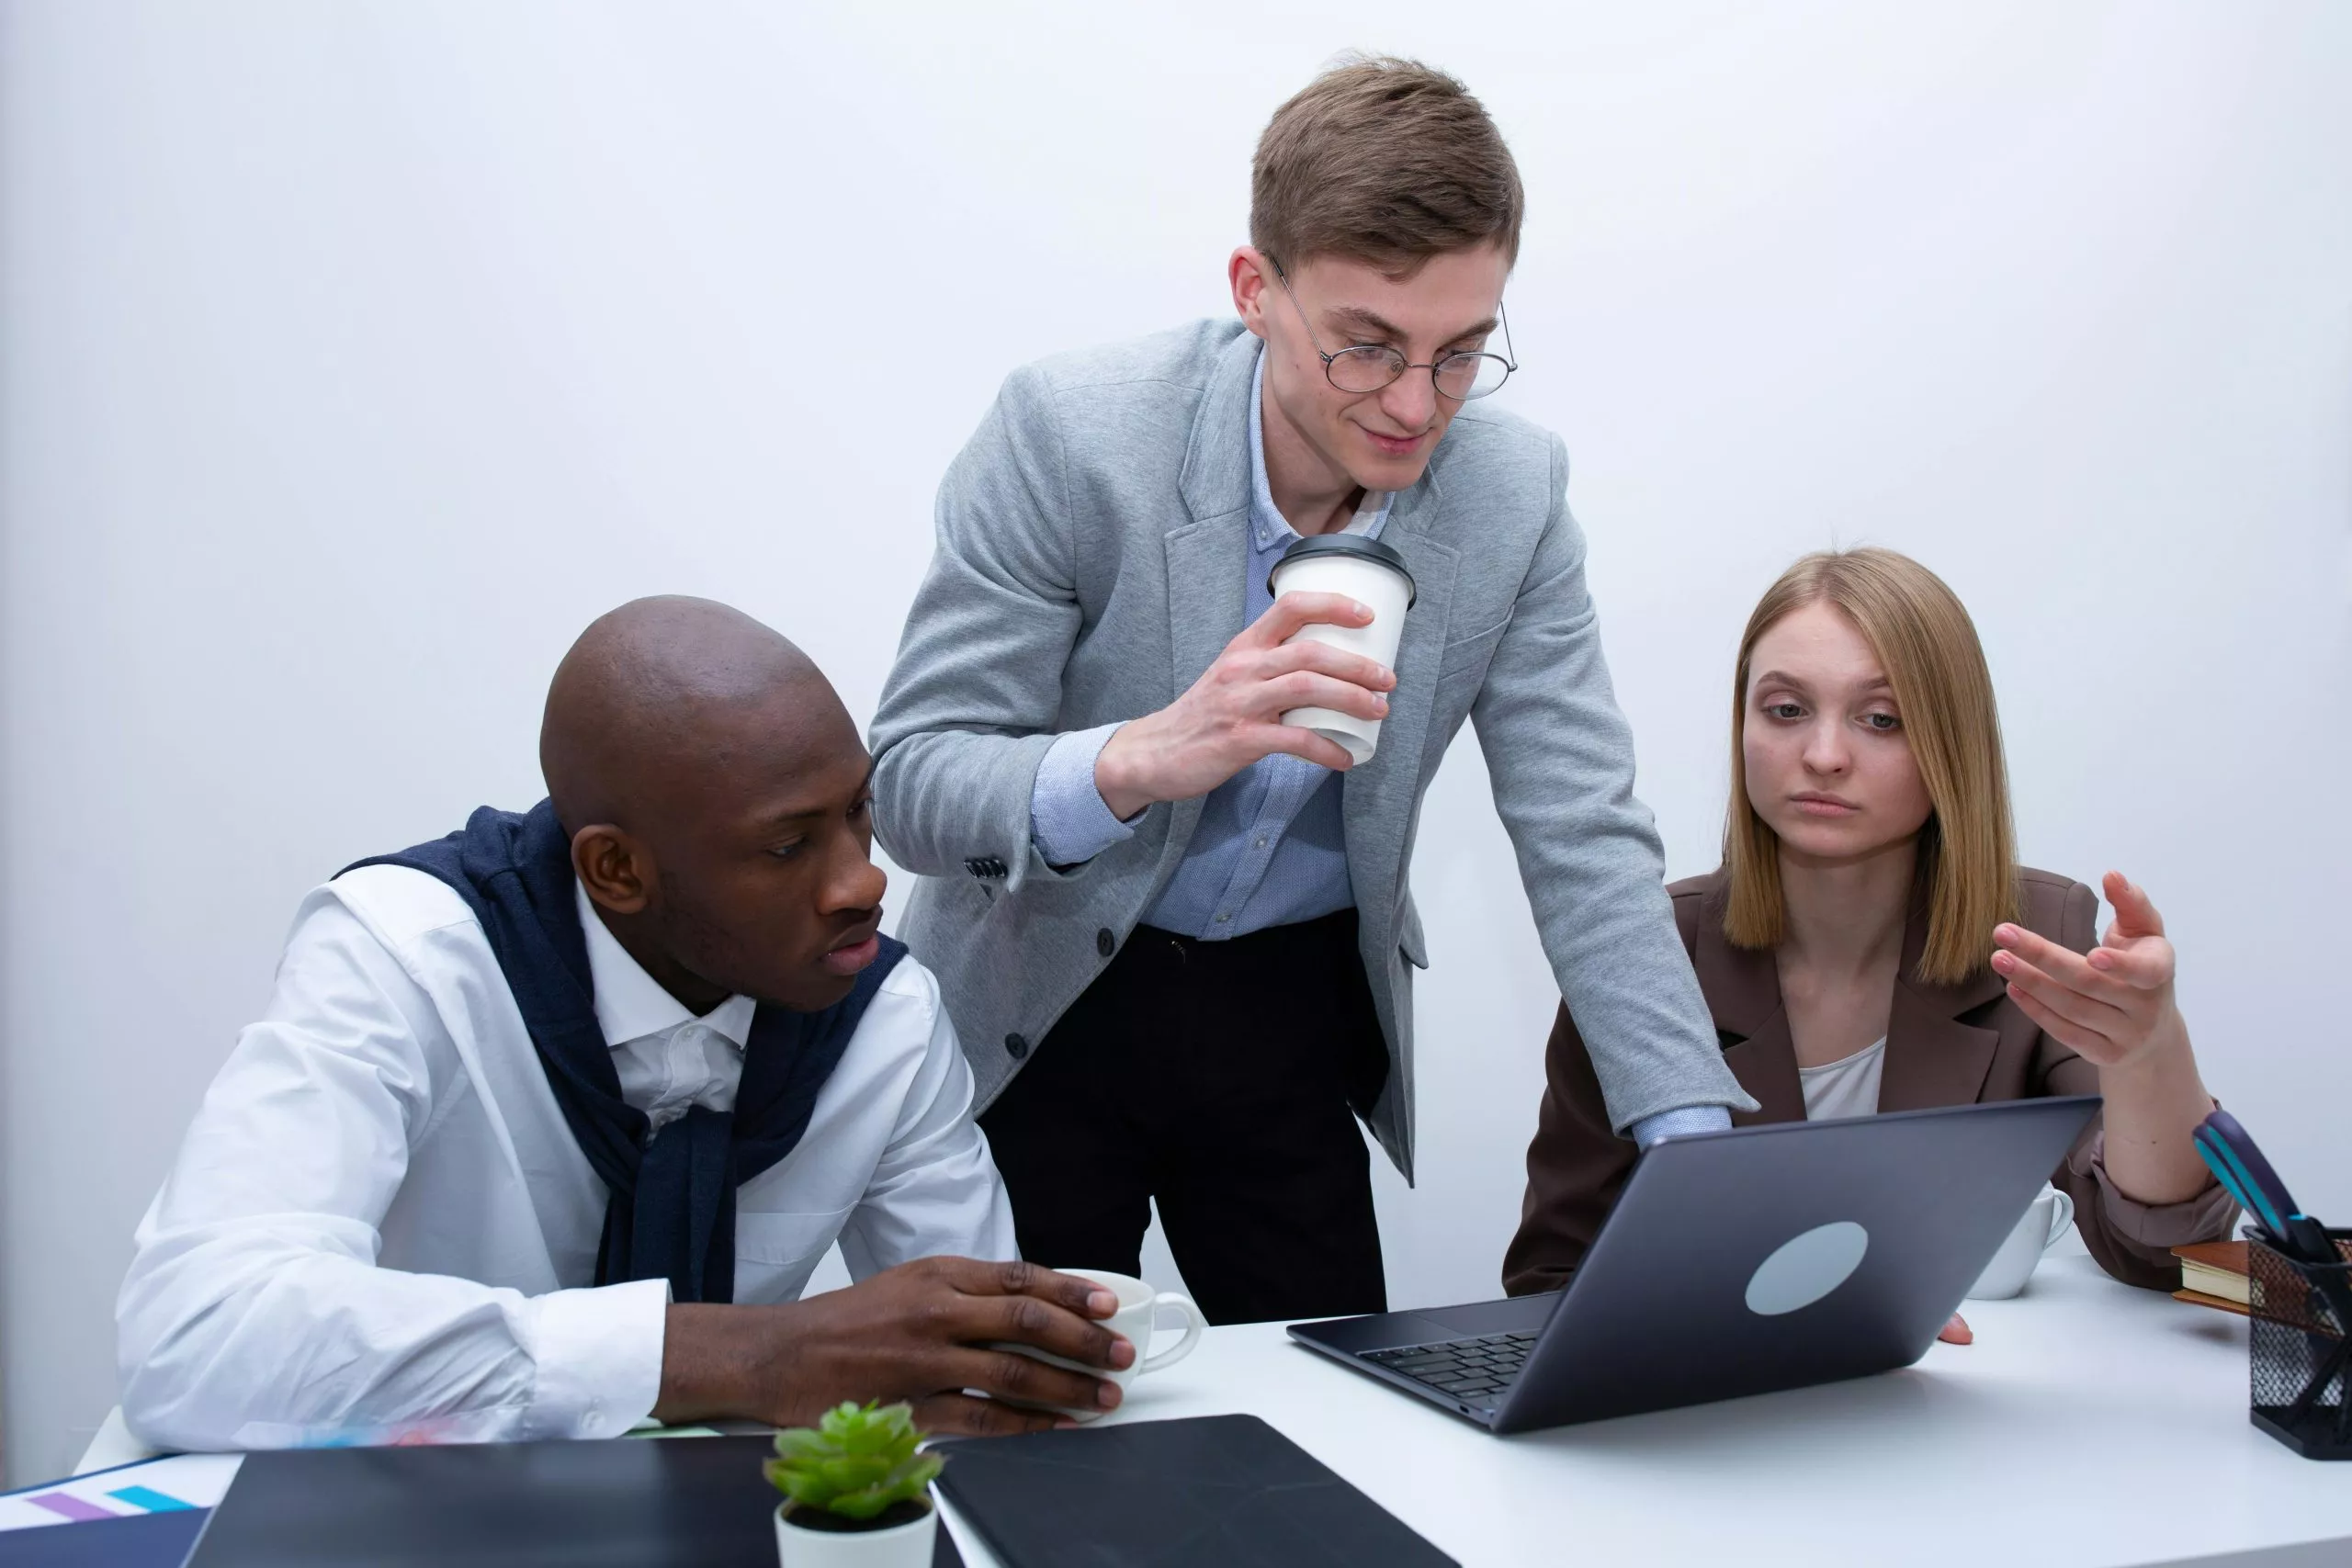 Stock image of team working on project 6